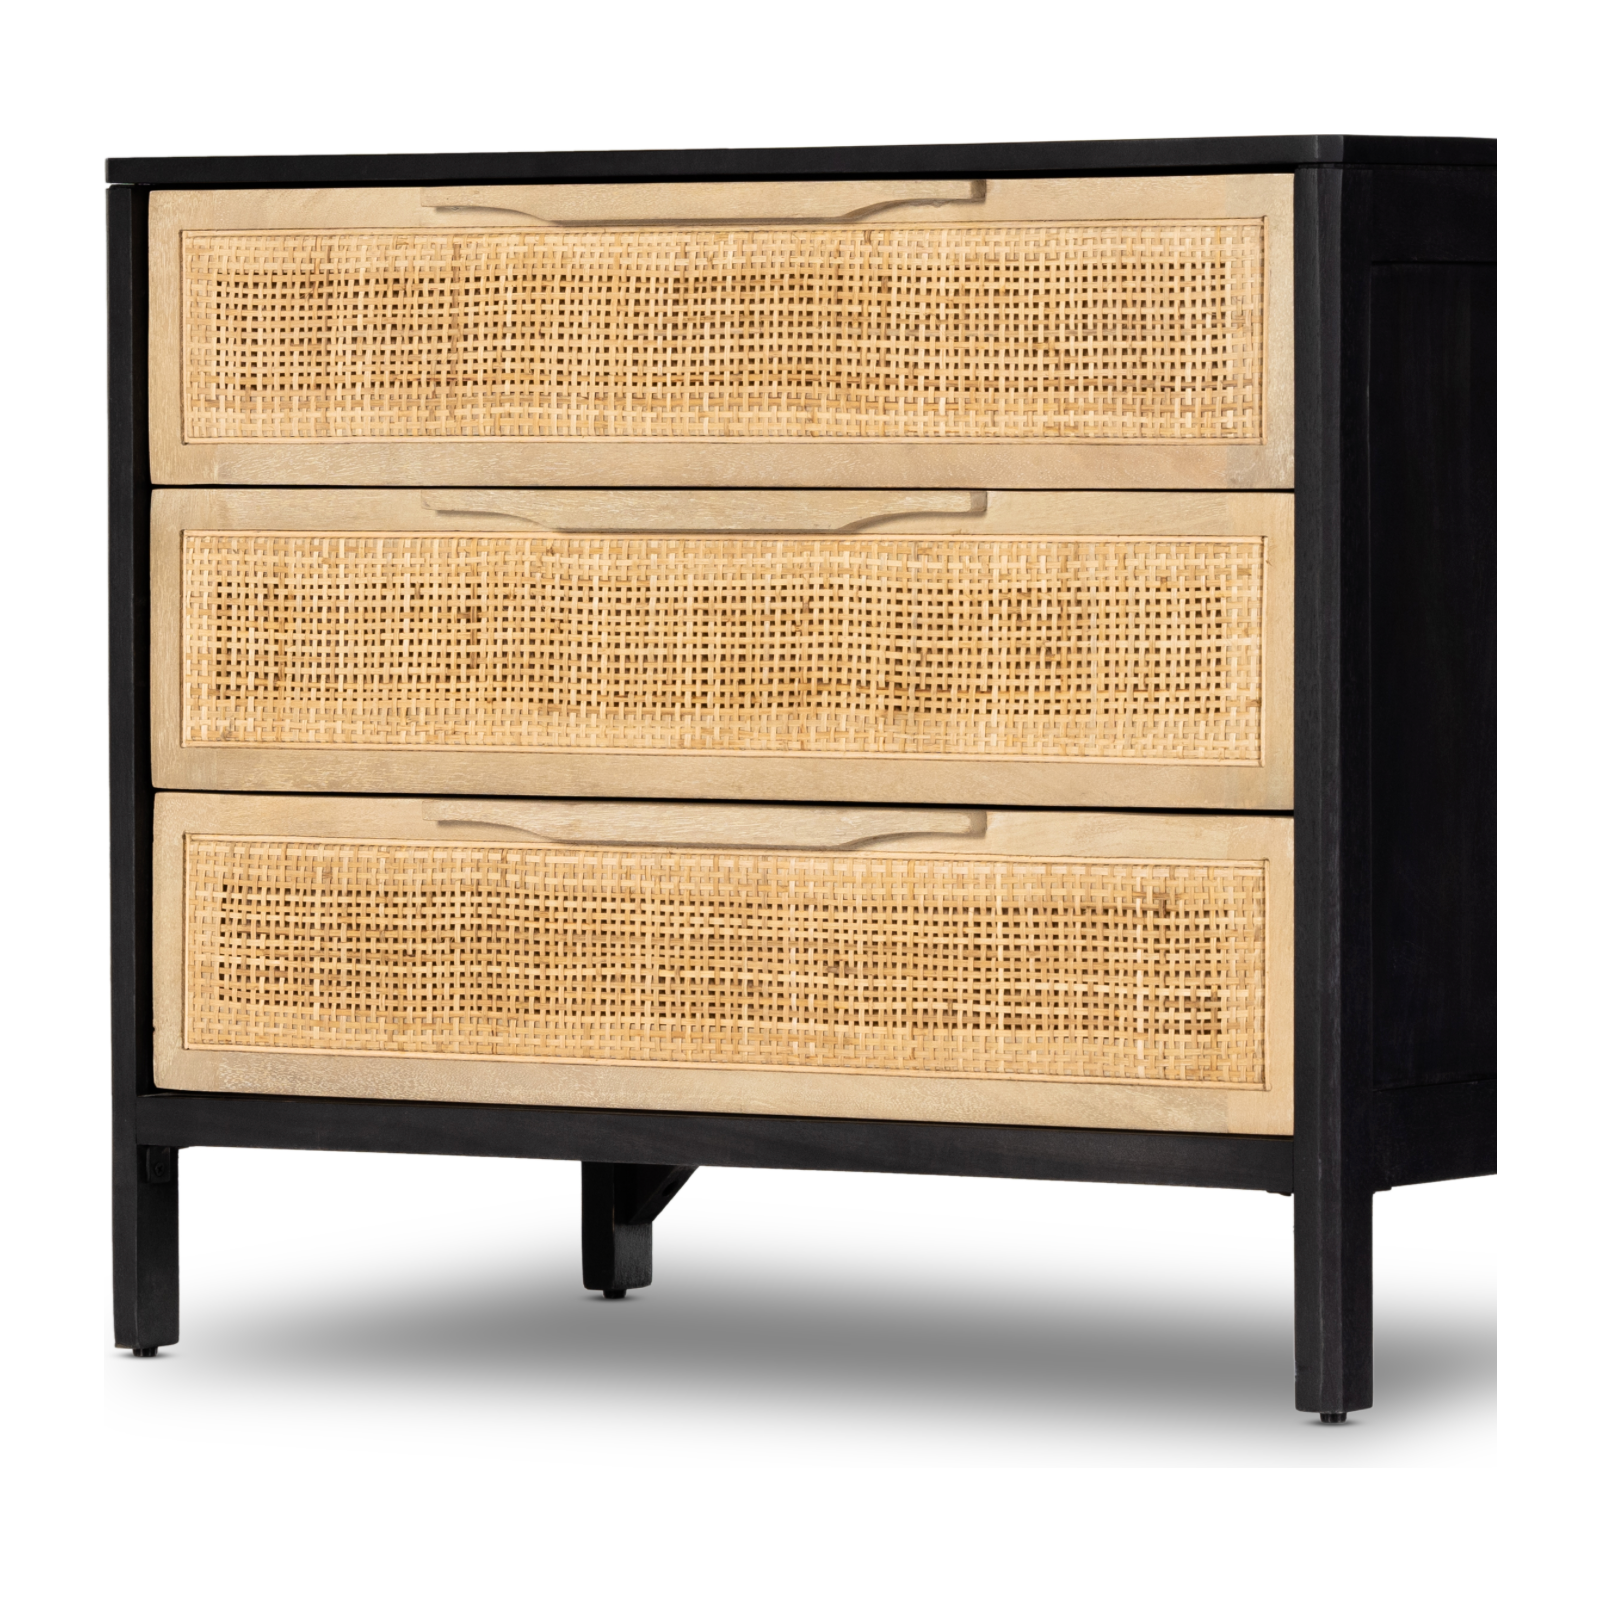 Brown wash mango frames inset woven cane, for a light, textural look with organic allure. Three spacious drawers provide plenty of closed storage. Amethyst Home provides interior design, new construction, custom furniture and area rugs in the Portland metro area